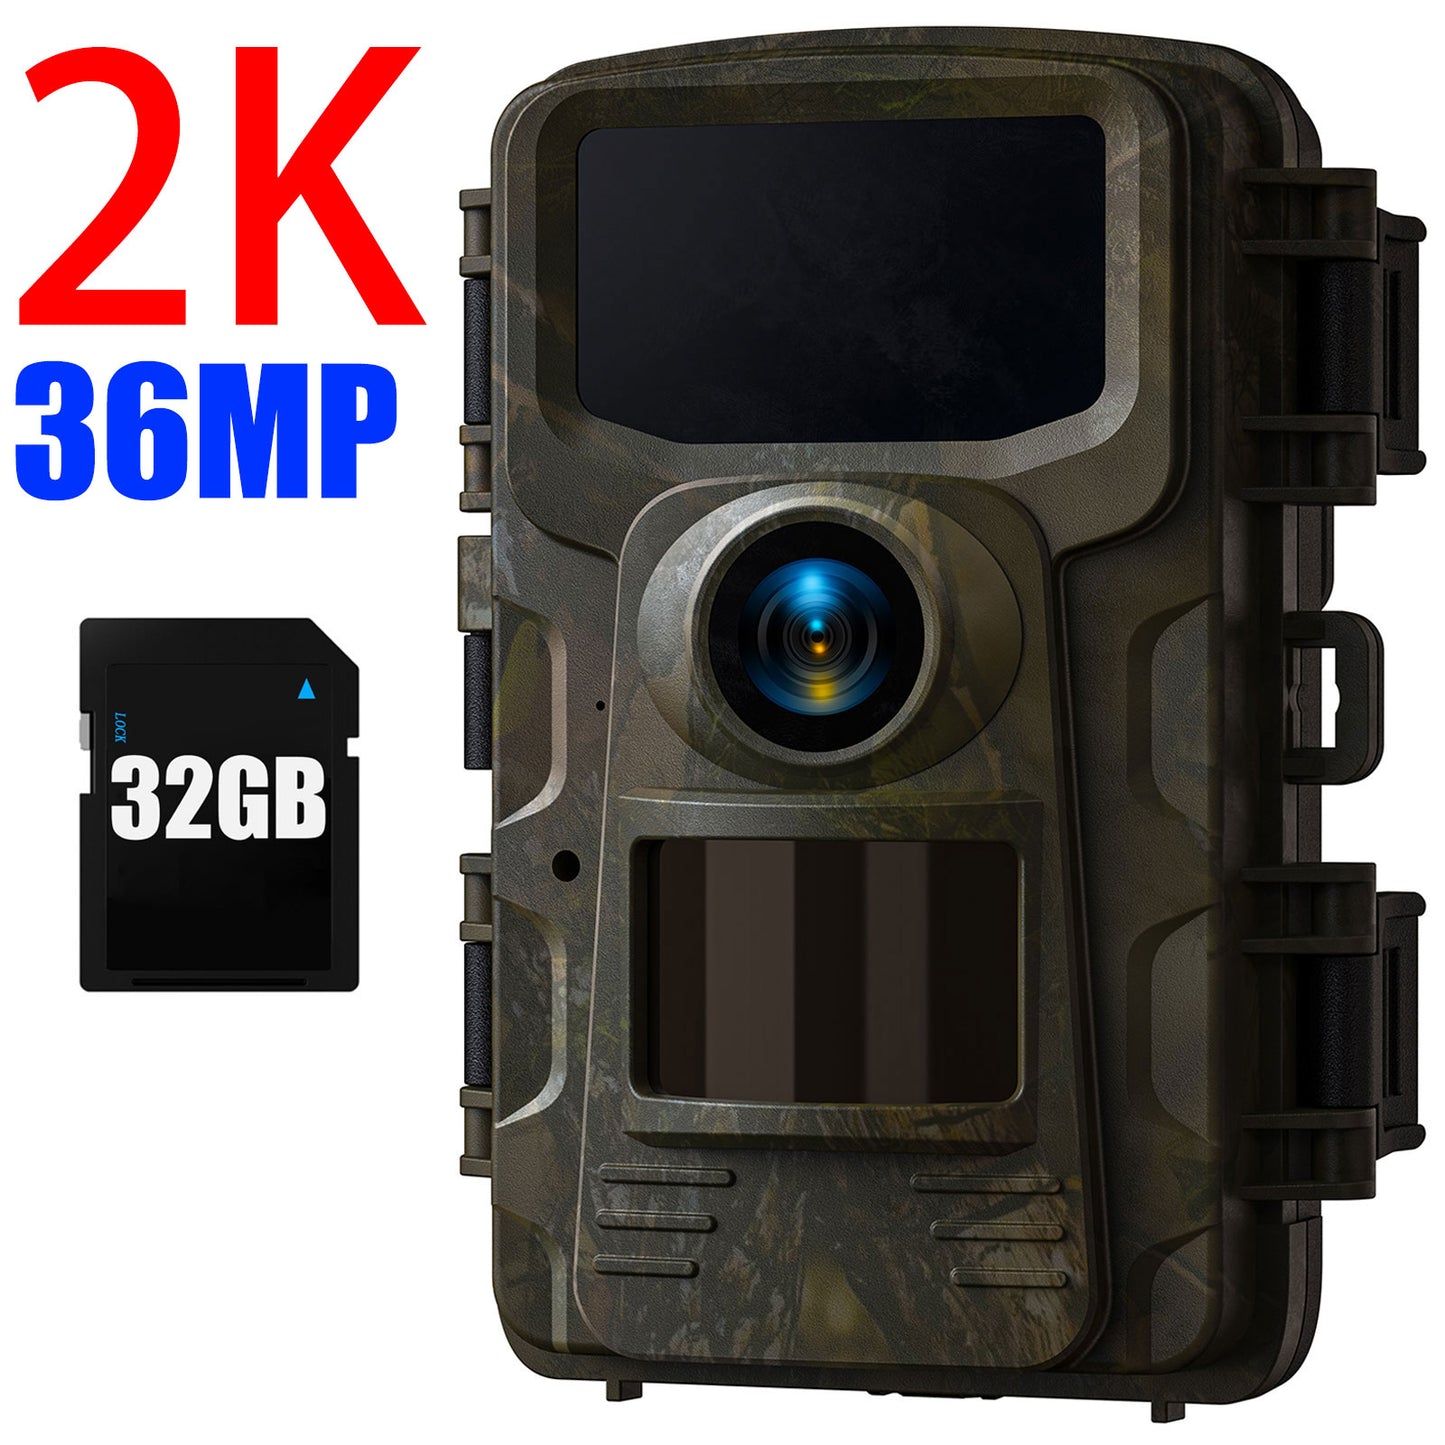 CAMPARK 2K 36MP Trail Camera with SD Card, Game Camera with 120°Wide-Angle Motion Latest Sensor View Hunting Deer Cam with 850nm Night Vision IP66 Waterproof 2.0" LCD for Wildlife Monitoring